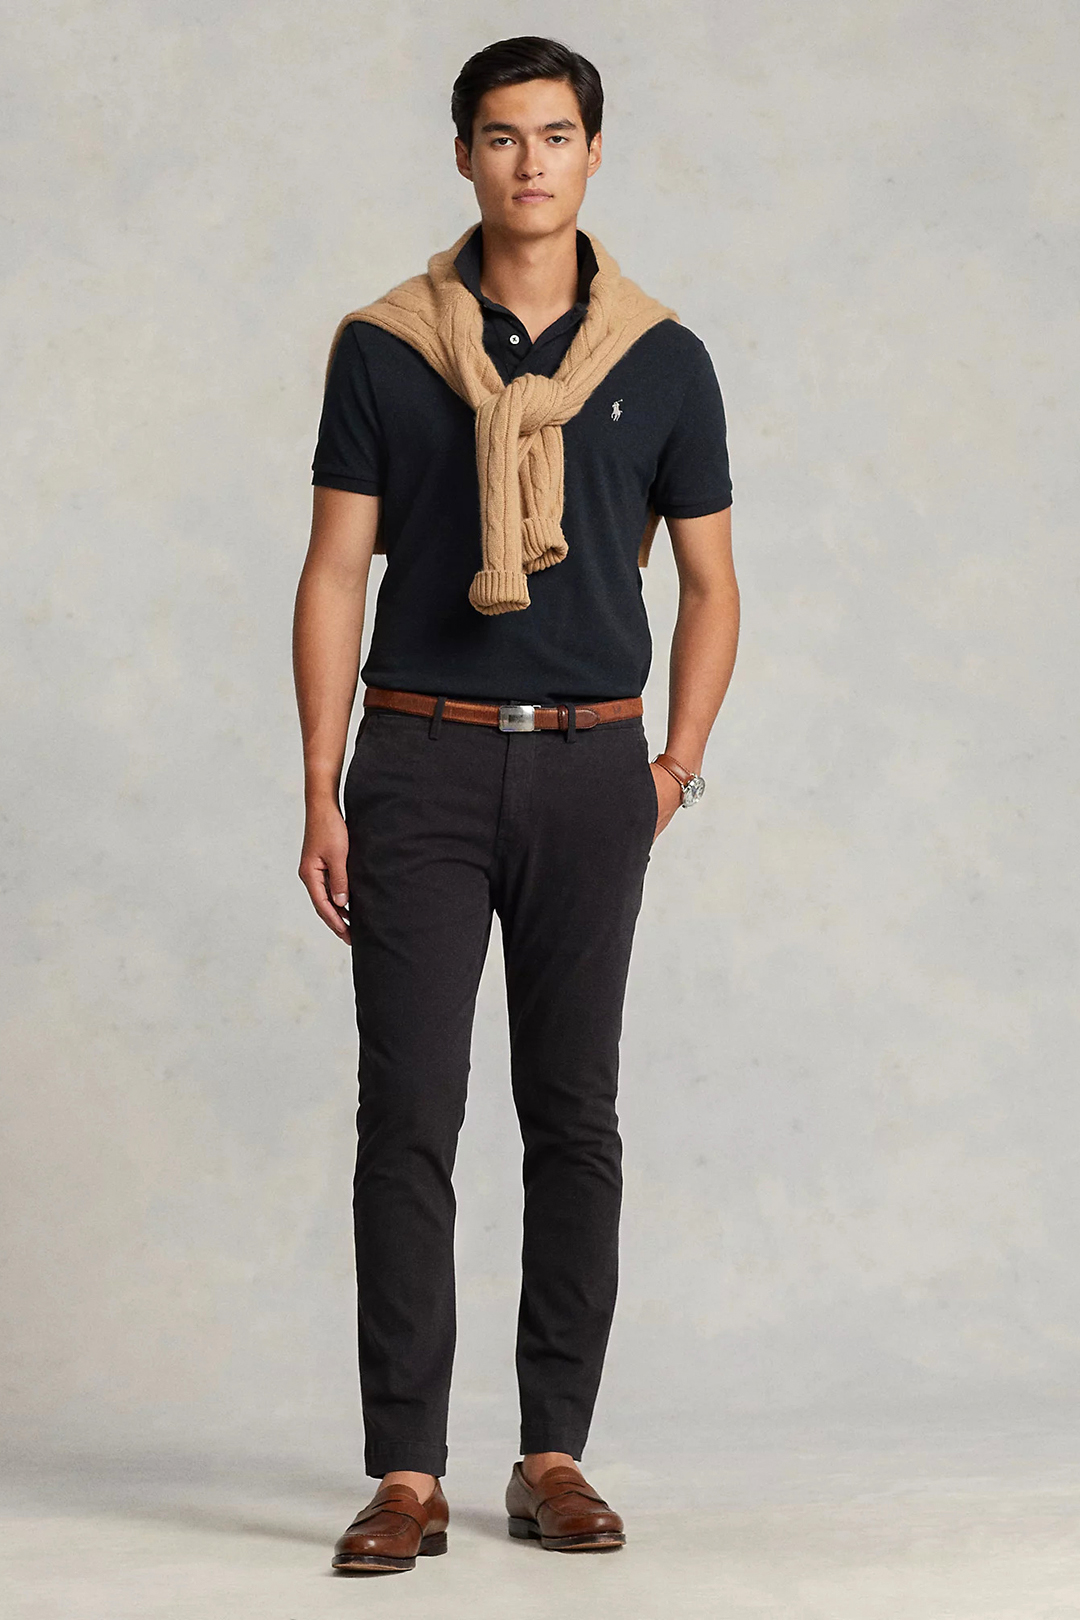 Navy polo t-shirt, tan sweater, black chinos, and brown loafers outfit